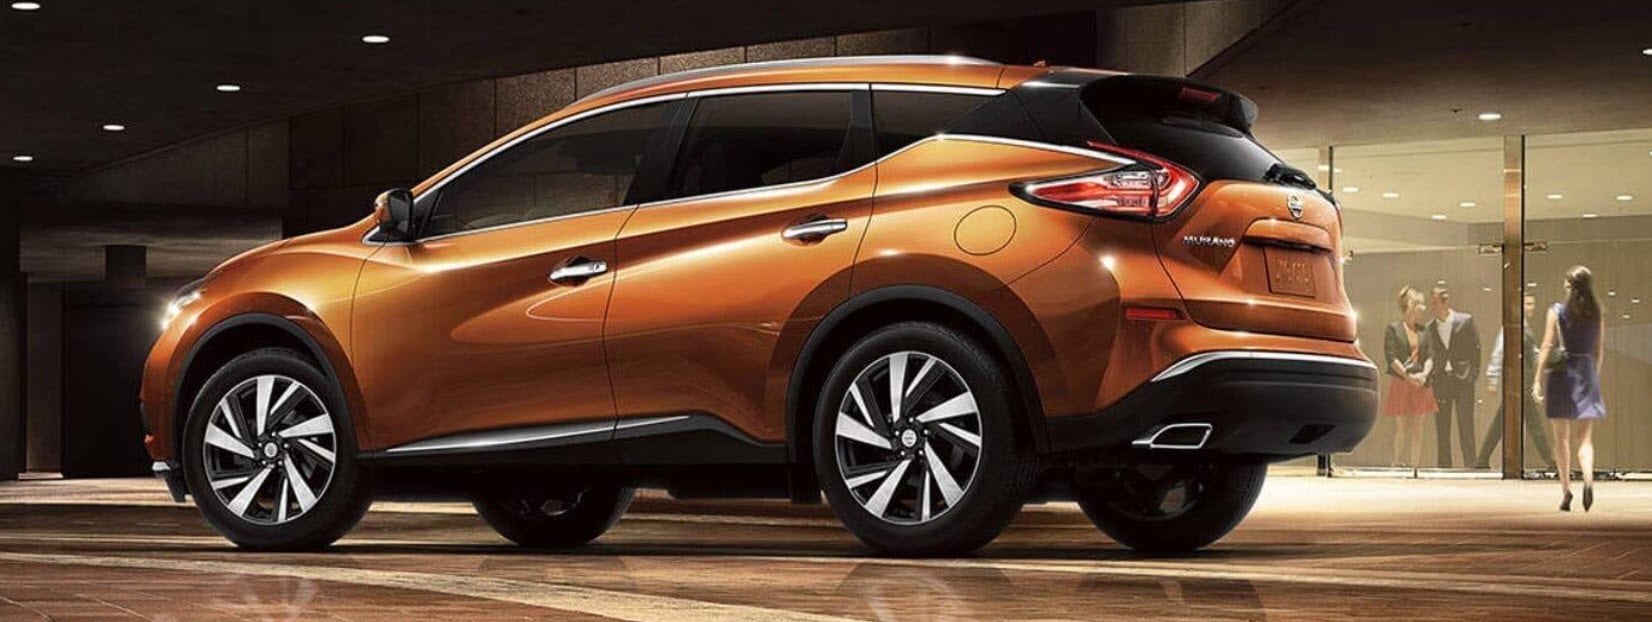 Nissan Murano for Sale near Me | Andy Mohr Nissan